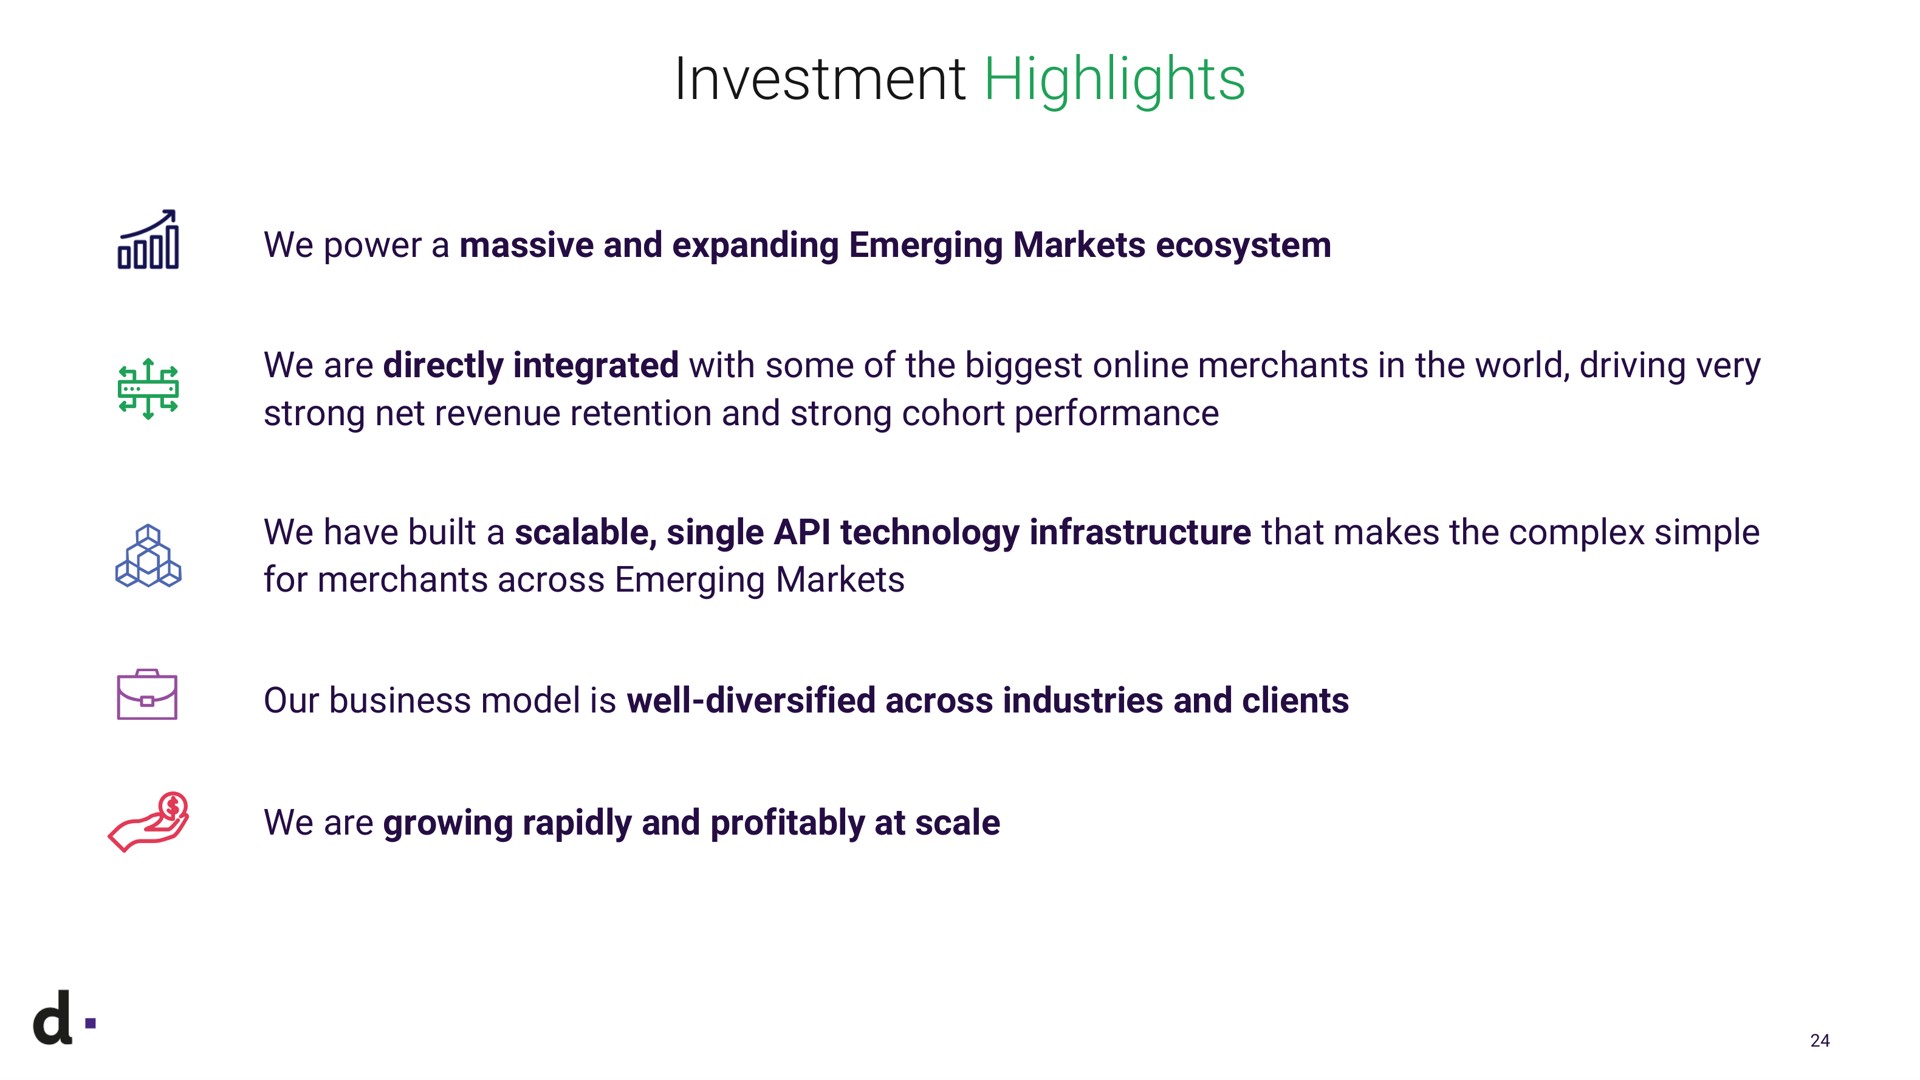 investment highlights we power a massive and expanding emerging markets ecosystem a we are directly integrated with some of the biggest merchants in the world driving very strong net revenue retention and strong cohort performance we have built a scalable single technology infrastructure that makes the complex simple for merchants across emerging markets our business model is well diversified across industries and clients we are growing rapidly and profitably at scale | dLocal